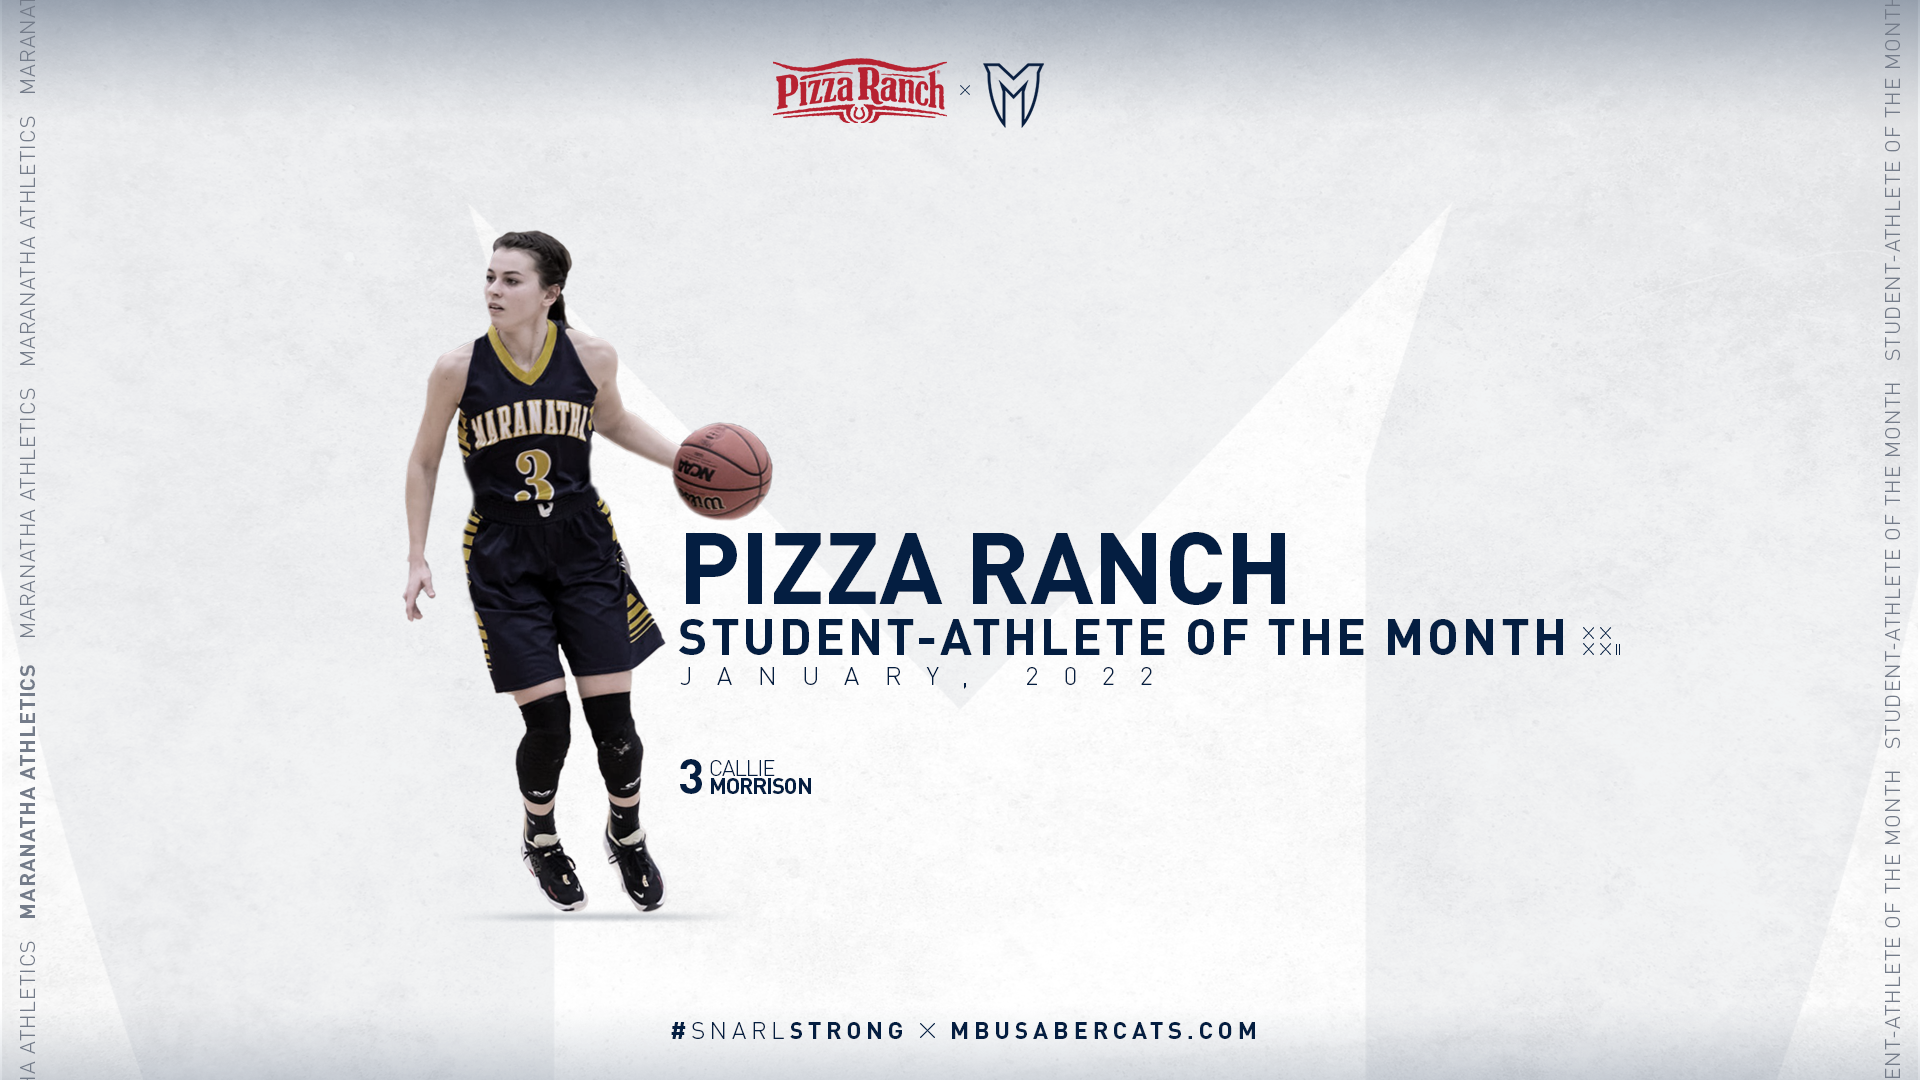 Callie named January Student-Athlete of the Month